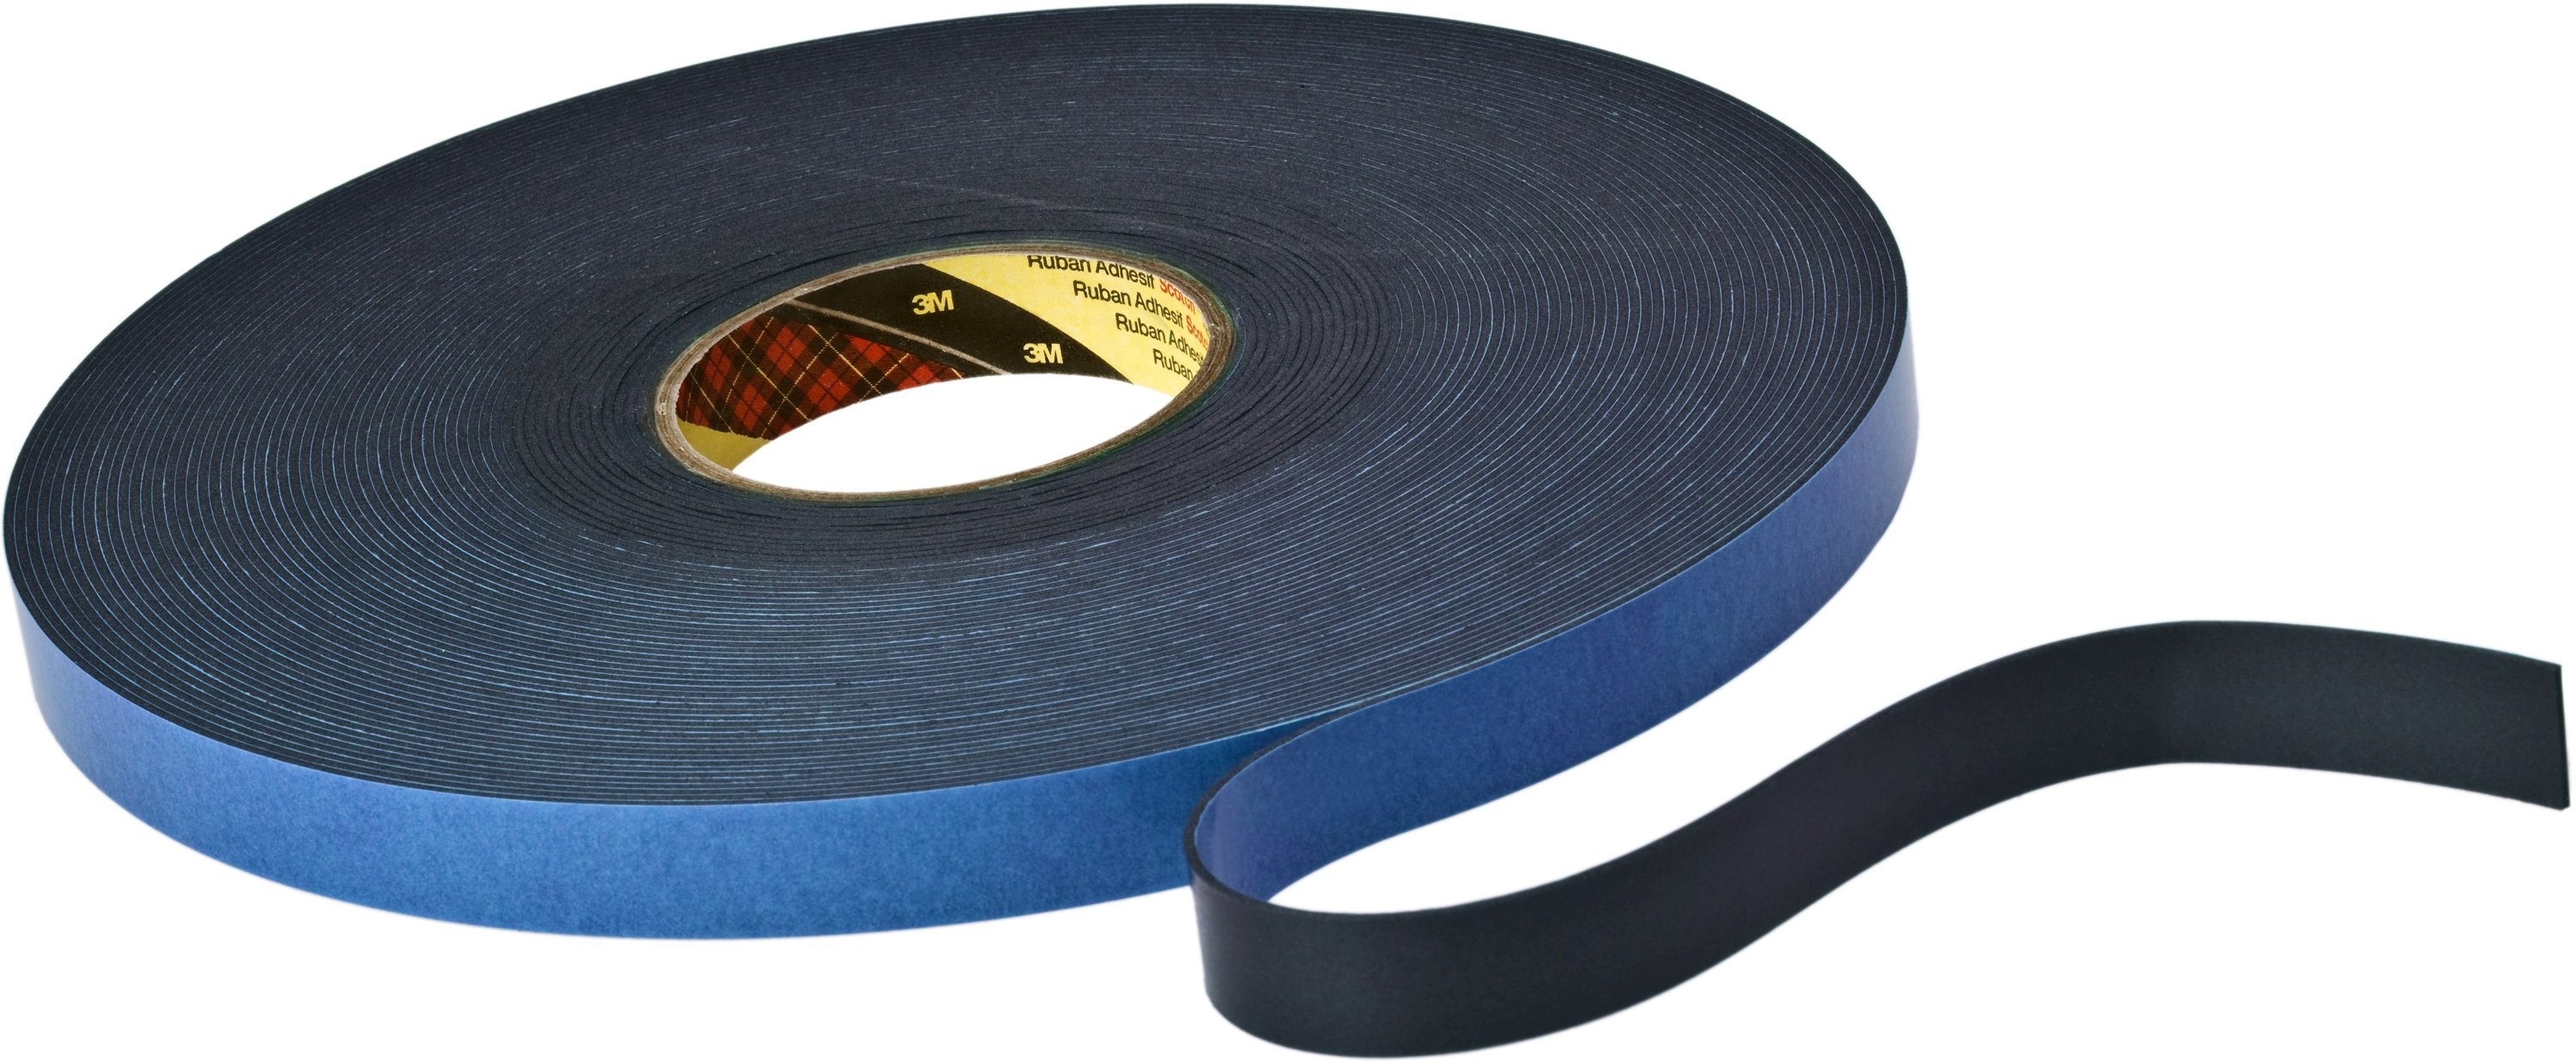 3M Double-sided PE foam tape with acrylic adhesive 9508B, black, 6 mm x 66 m, 0.8 mm